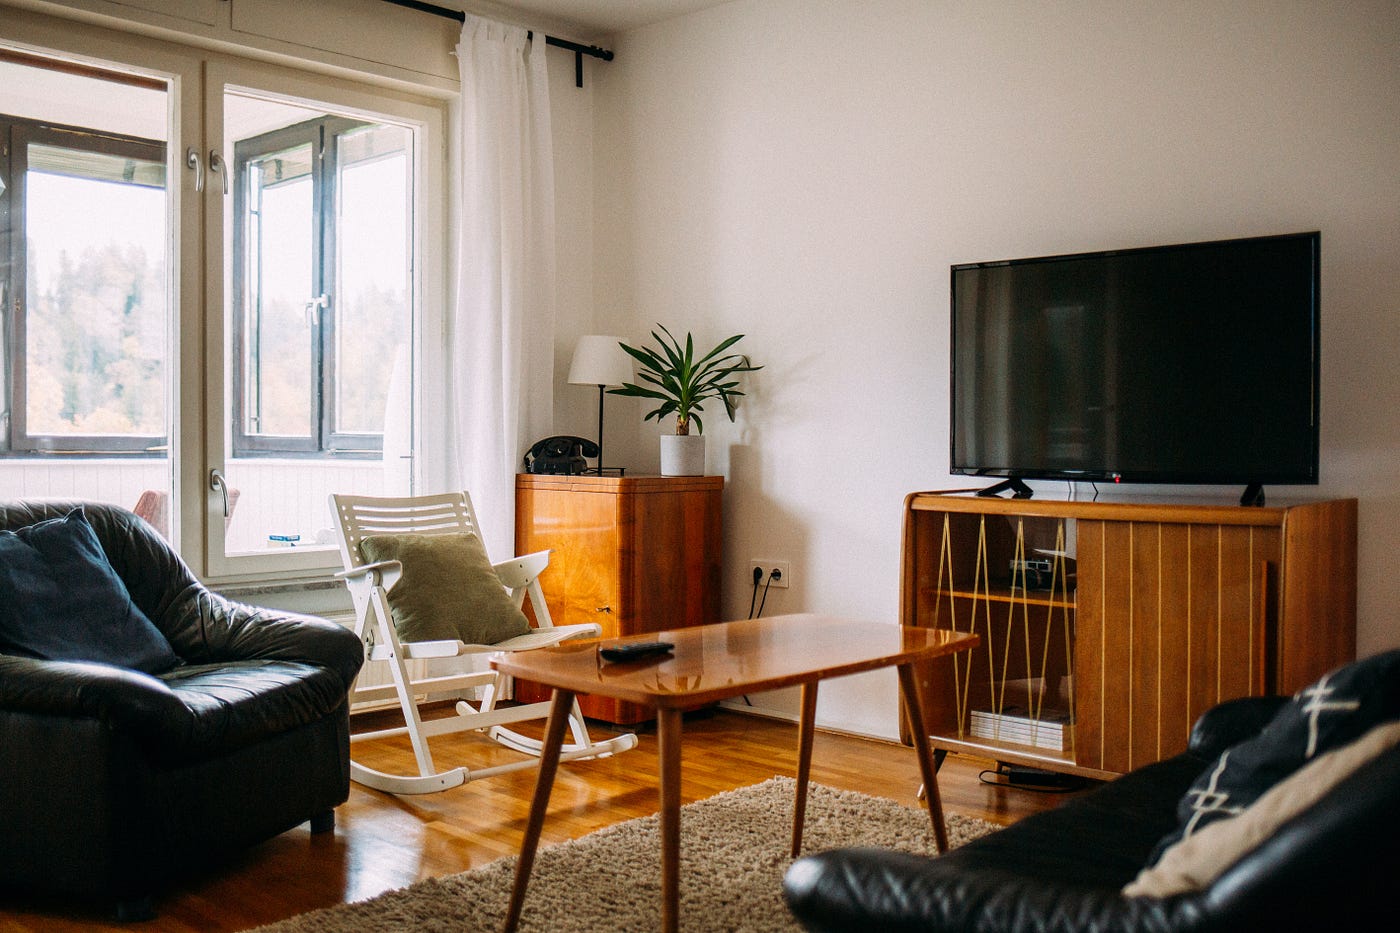 How to Make the Living Room More Eco-Friendly | by Kaylee Craig | Eco-Frugal  | Medium